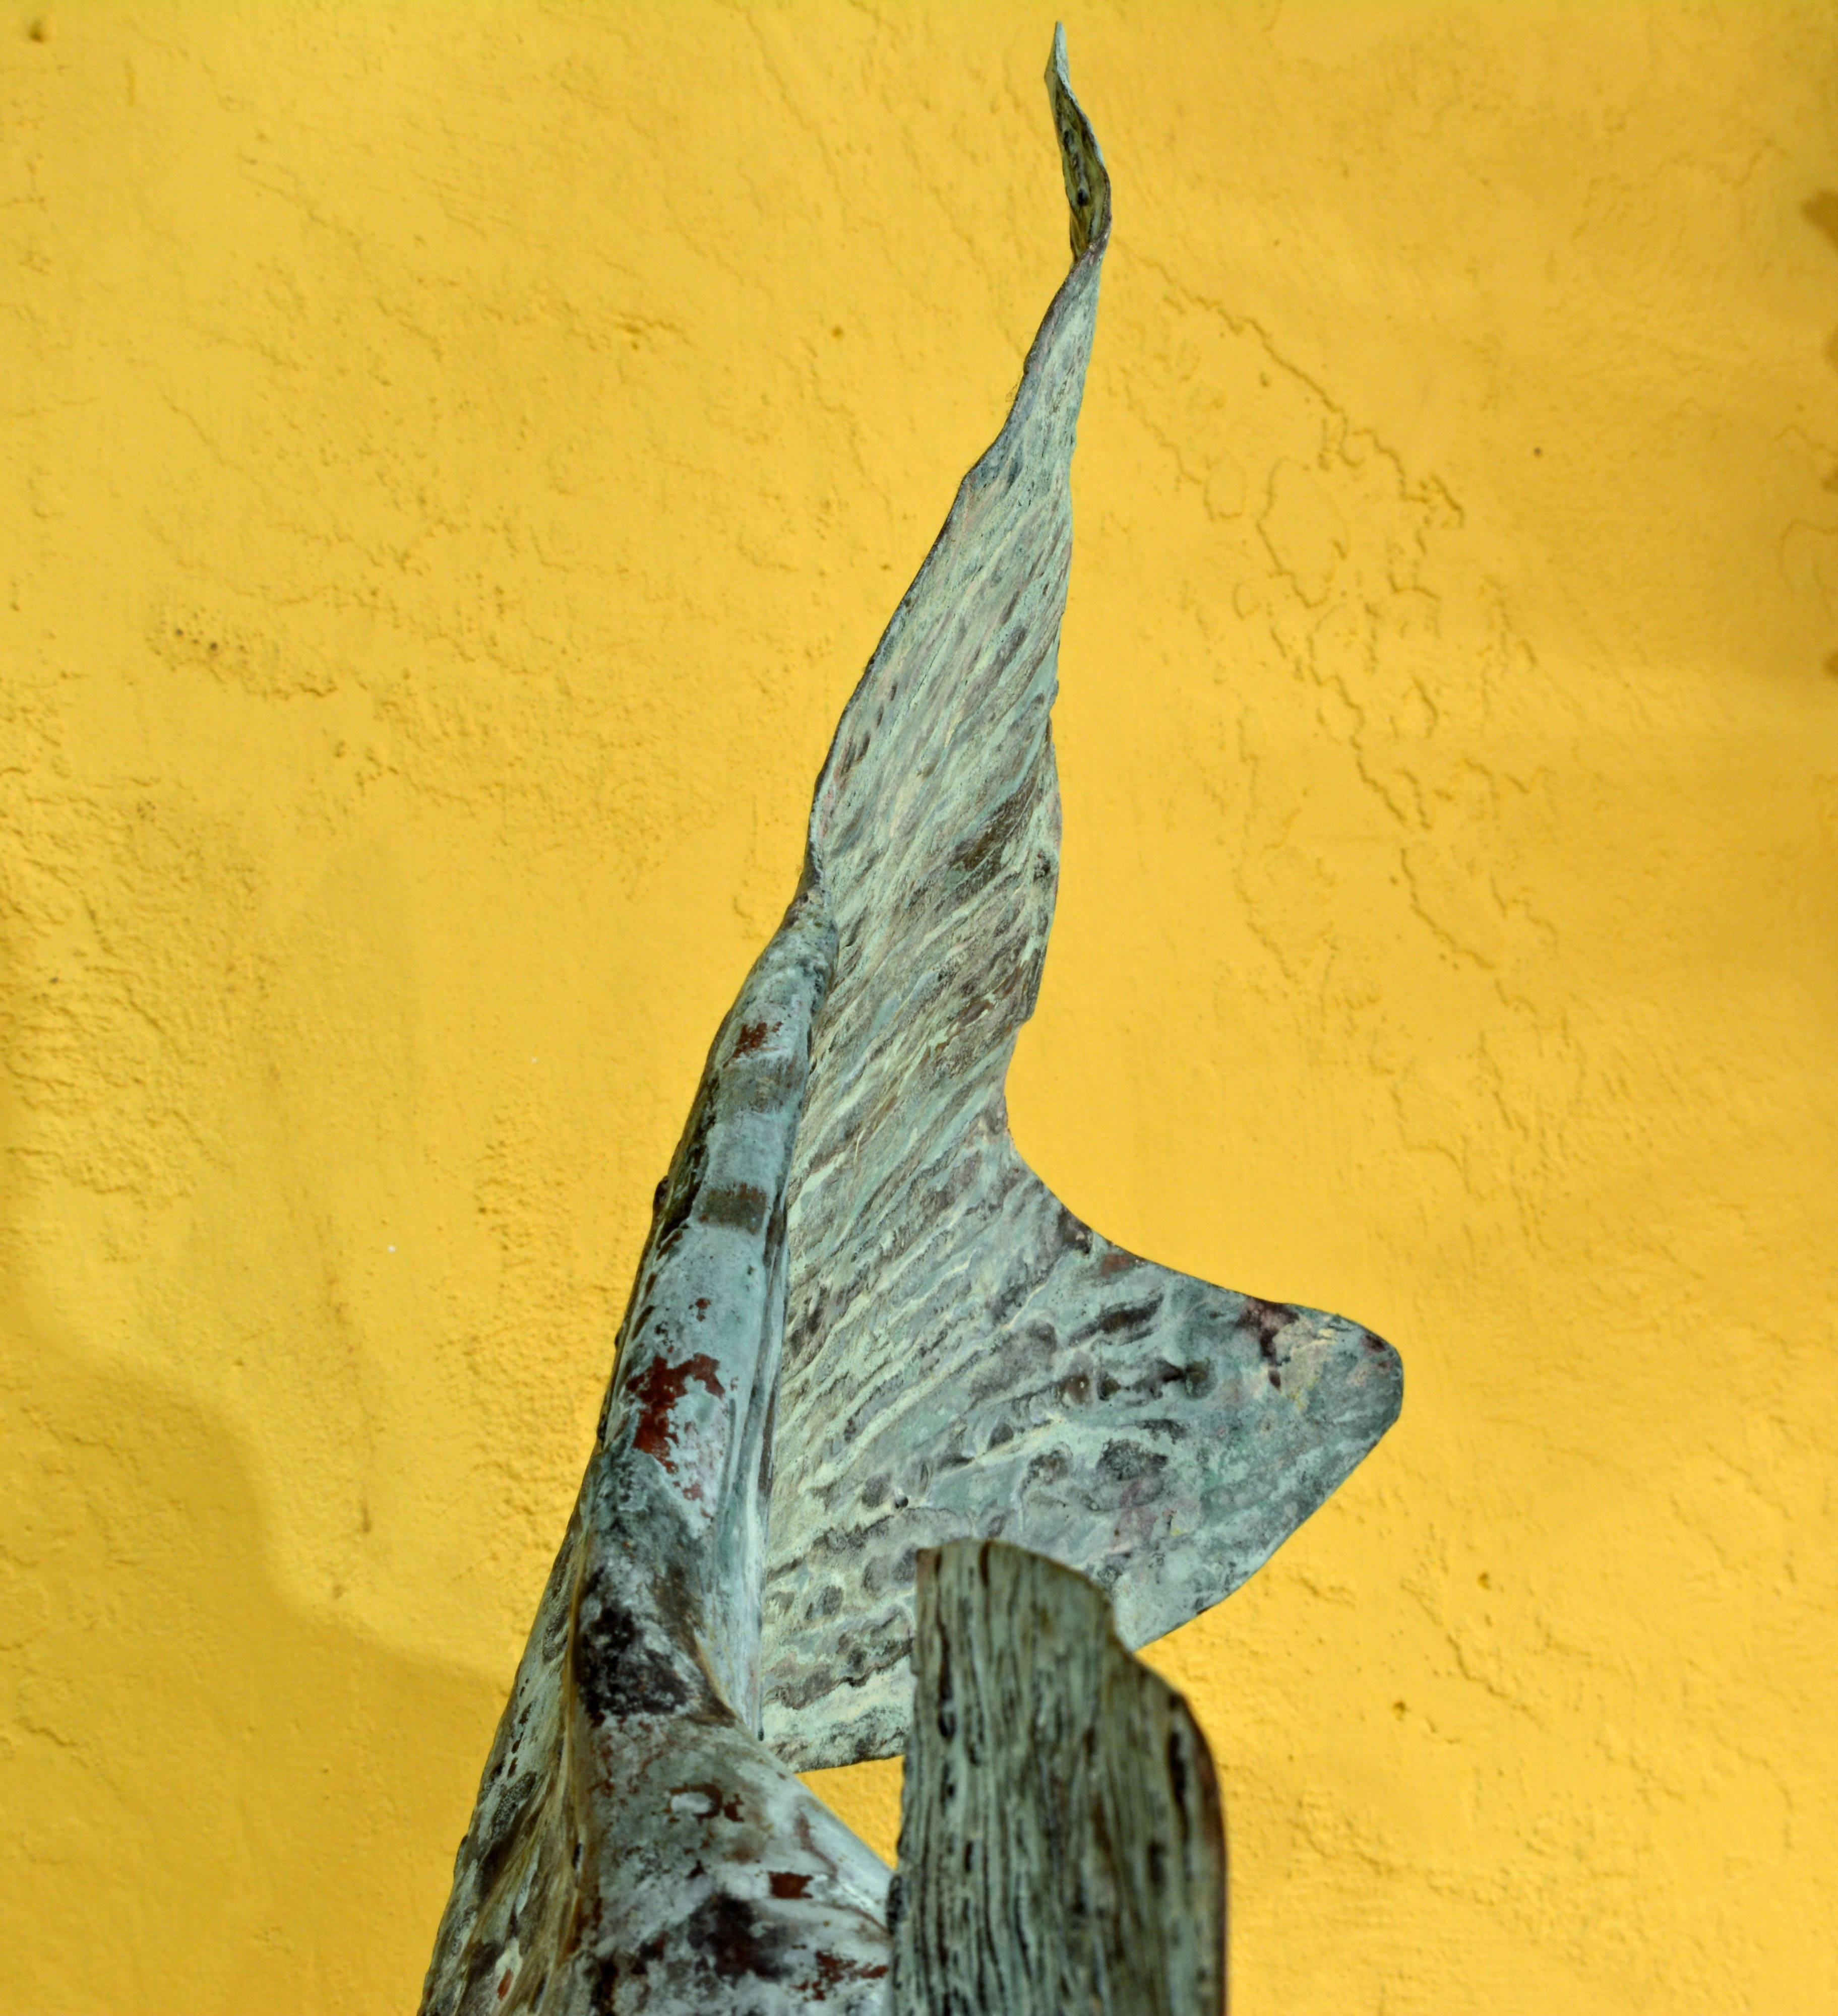 20th Century Large Verdigris Copper Sculpture of a Fish Mounted on a Real Coral Rock Pedestal